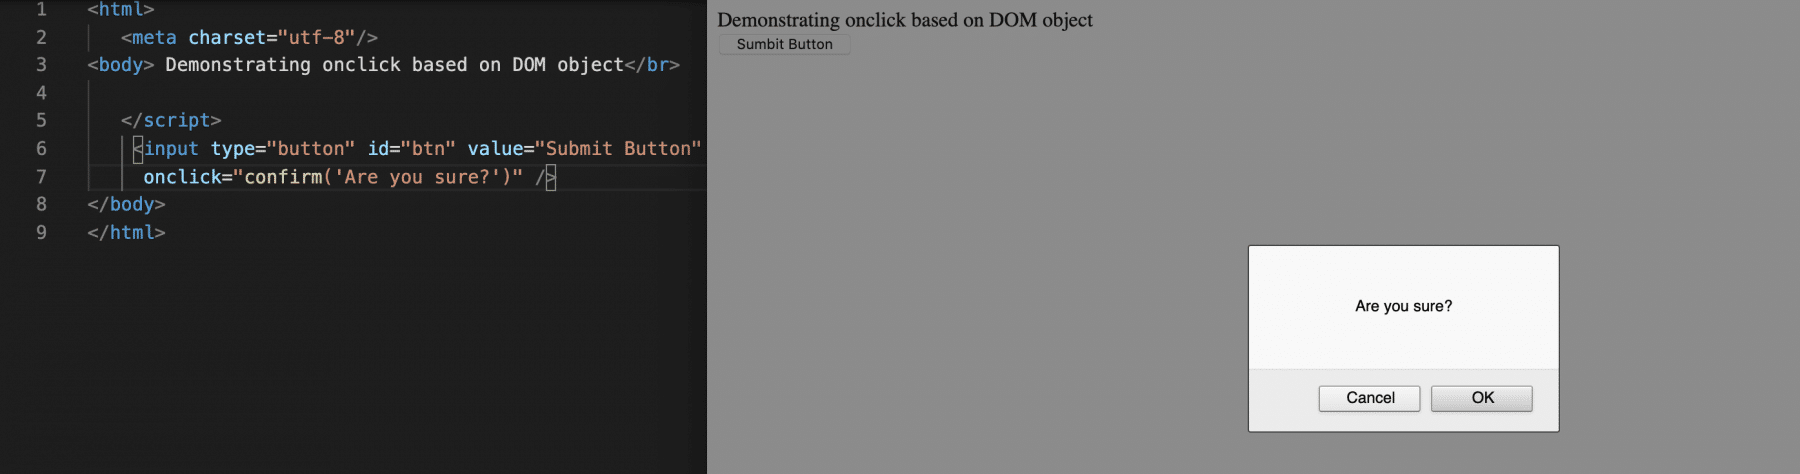  Demonstrating OnClick based on DOM object